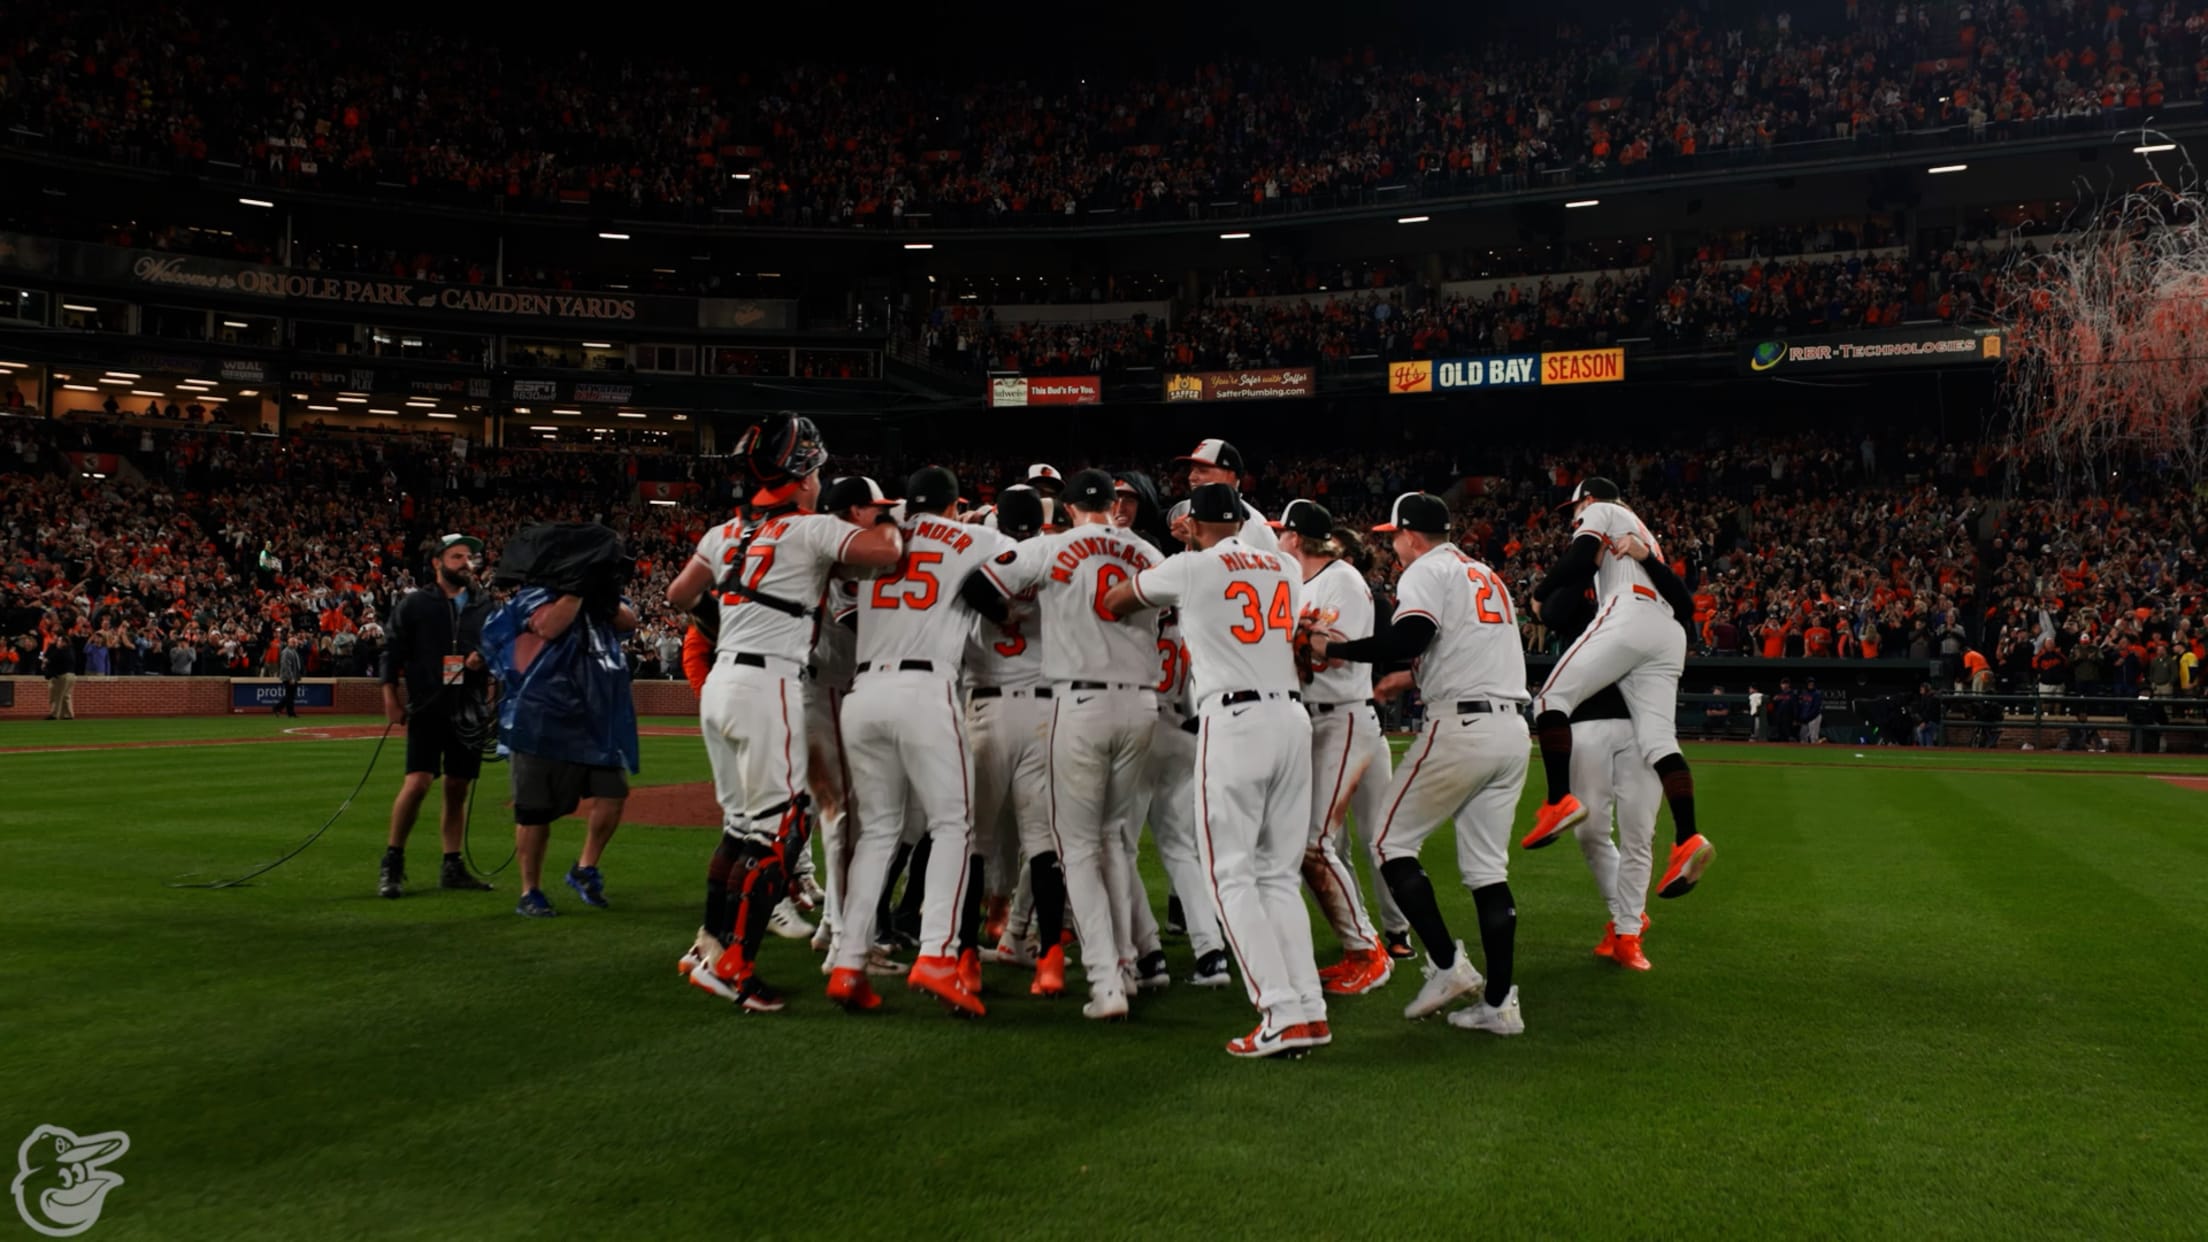 Mountcastle homers off Cease, Orioles hold off White Sox 5-3 - WTOP News